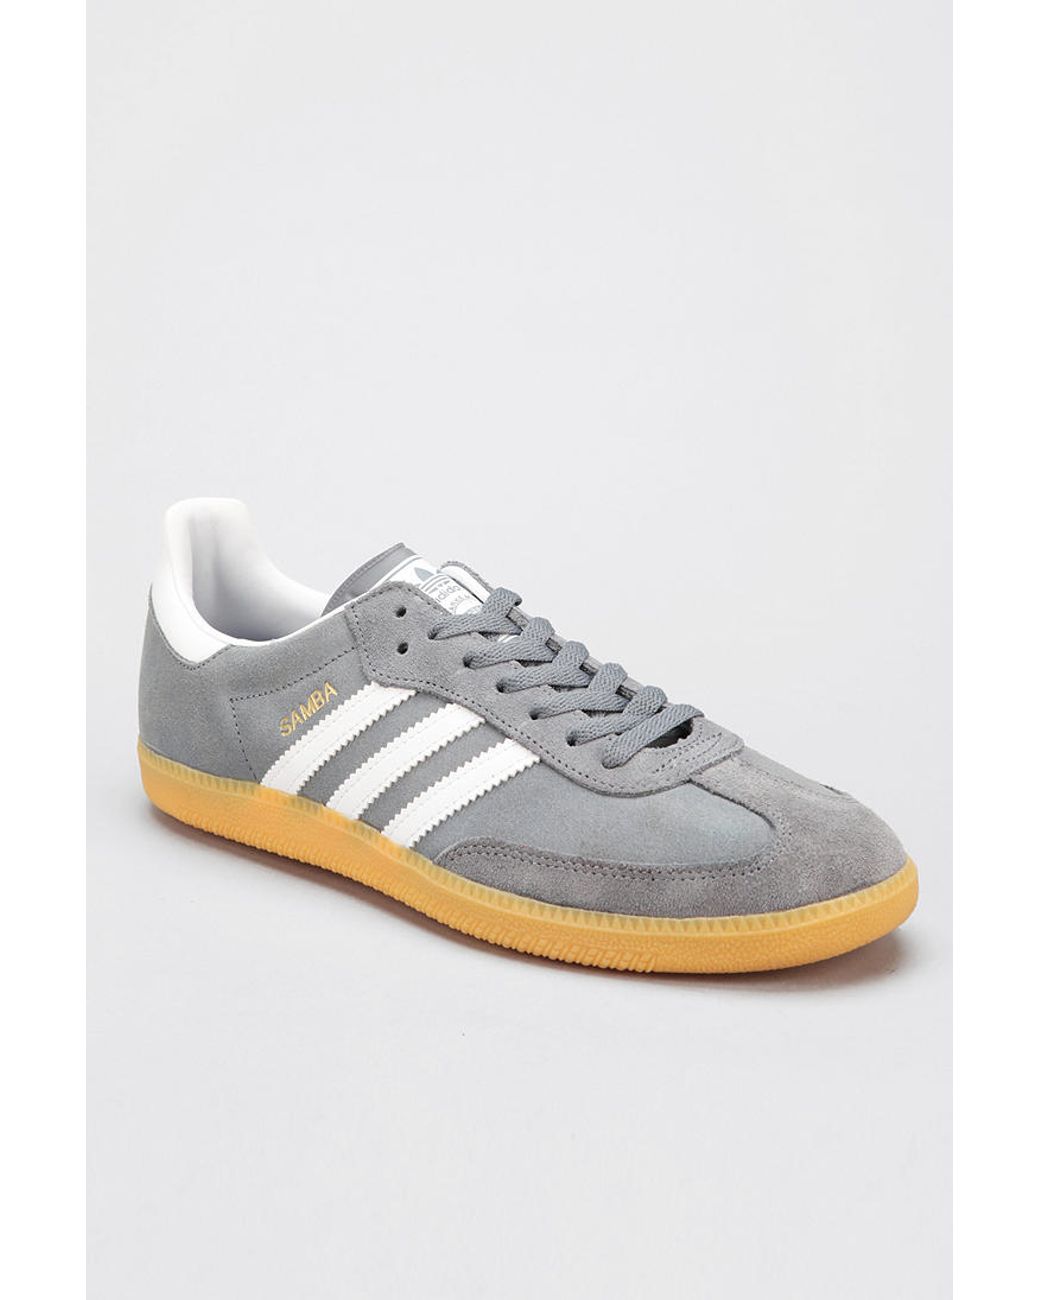 Urban Outfitters Adidas Samba Suede Sneaker in Gray for Men | Lyst